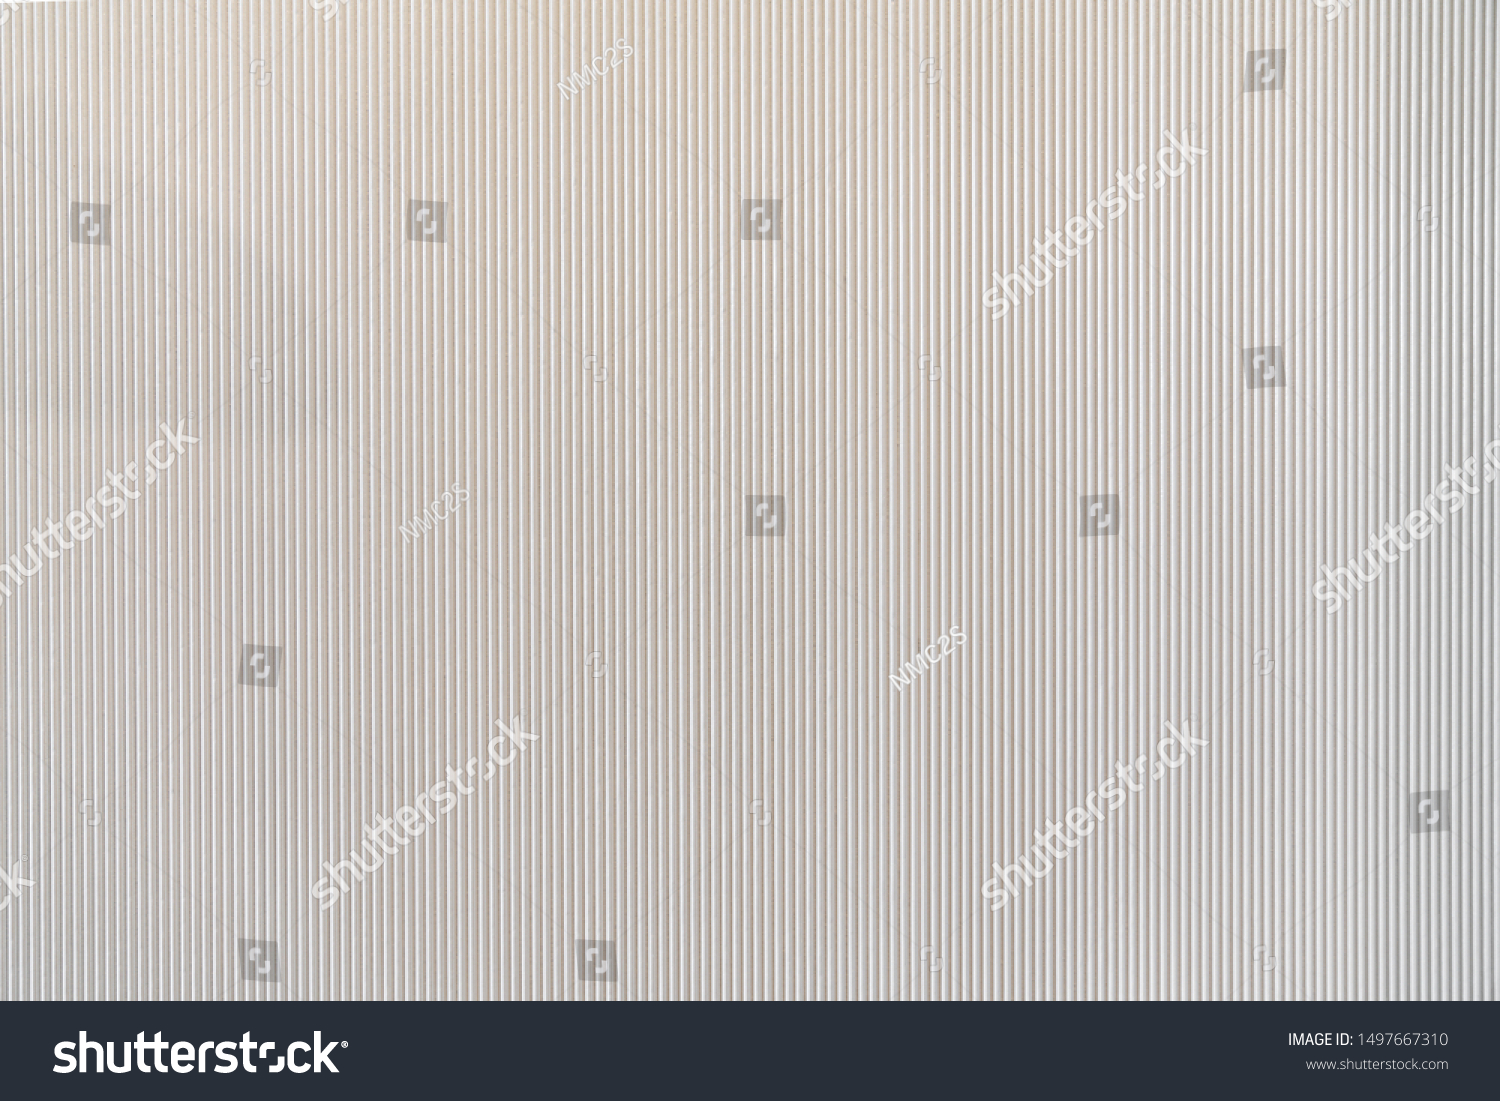 4,394 The fluted wall Images, Stock Photos & Vectors | Shutterstock